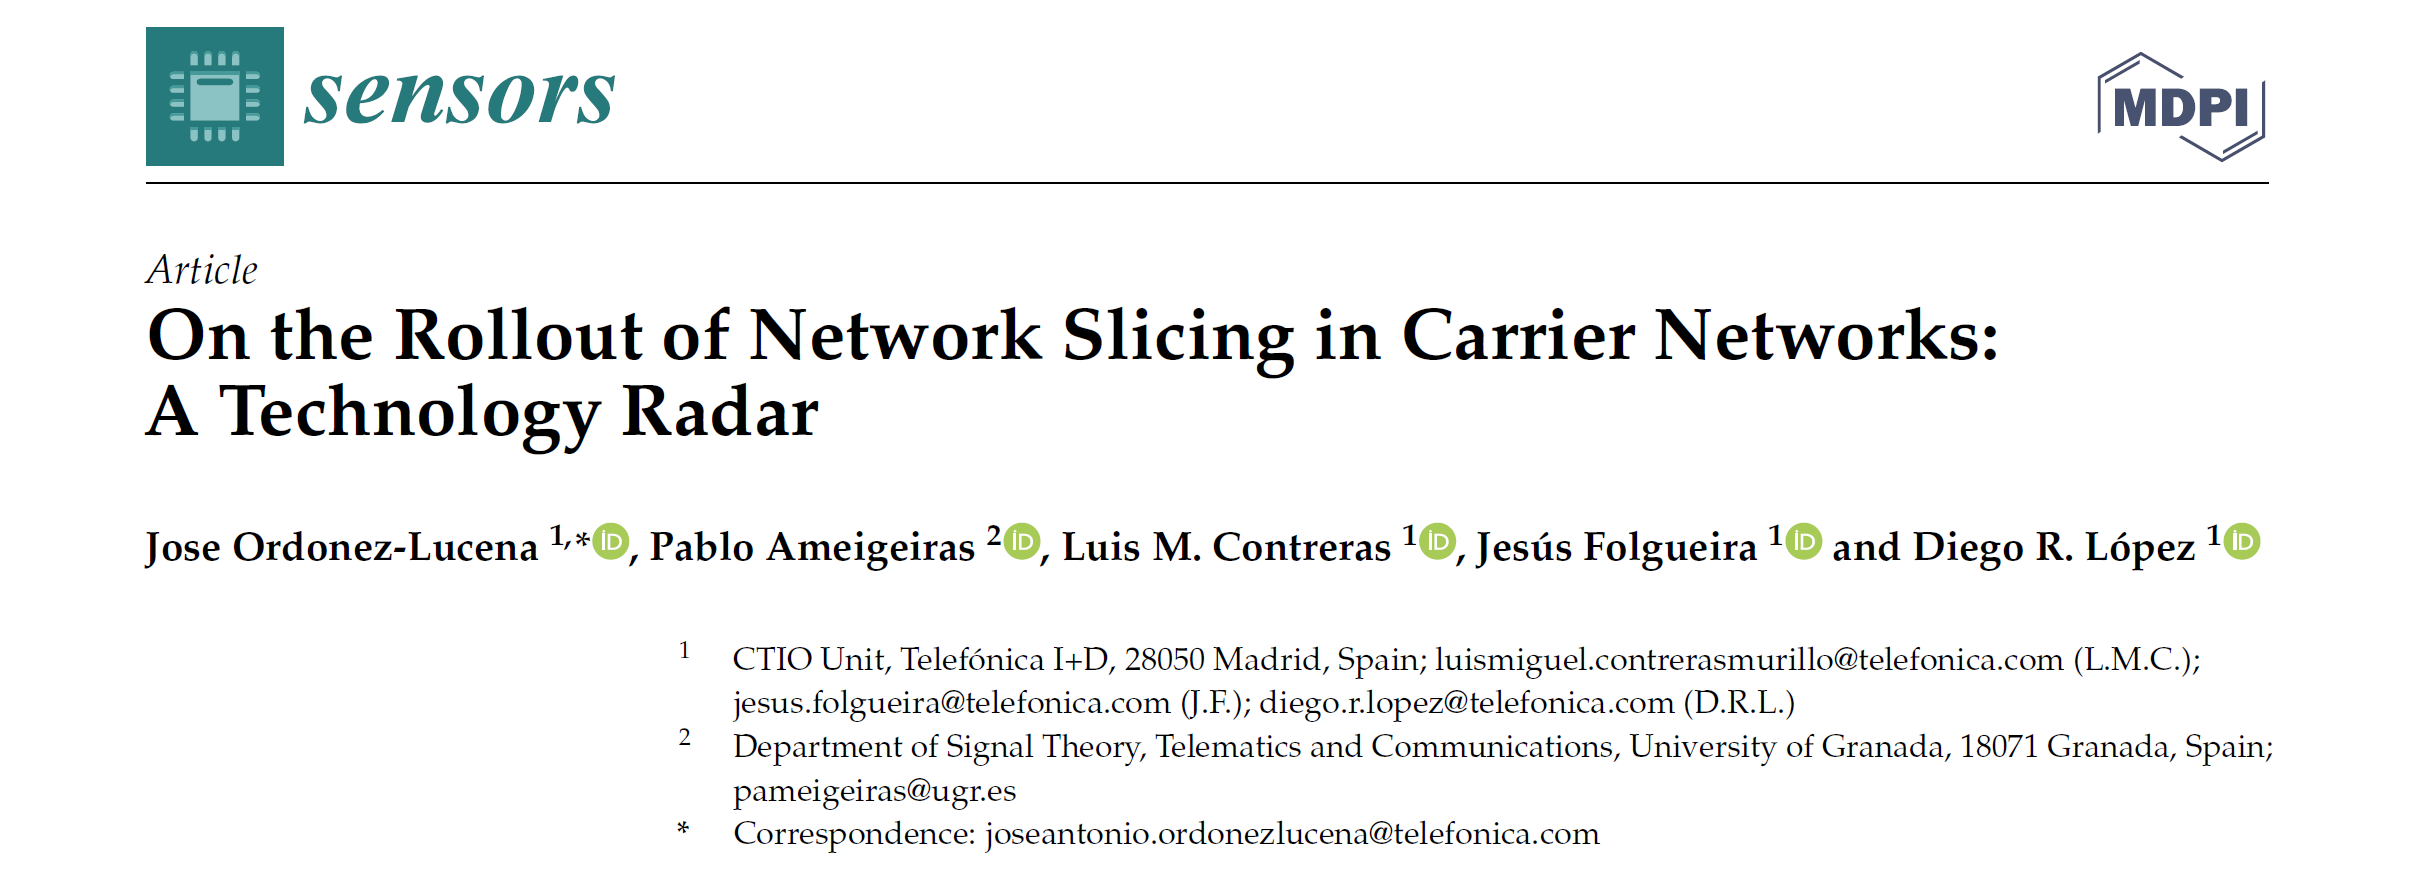 The project’s latest paper on “On the Rollout of Network Slicing in Carrier Networks: A Technology Radar” is available on the project webpage!